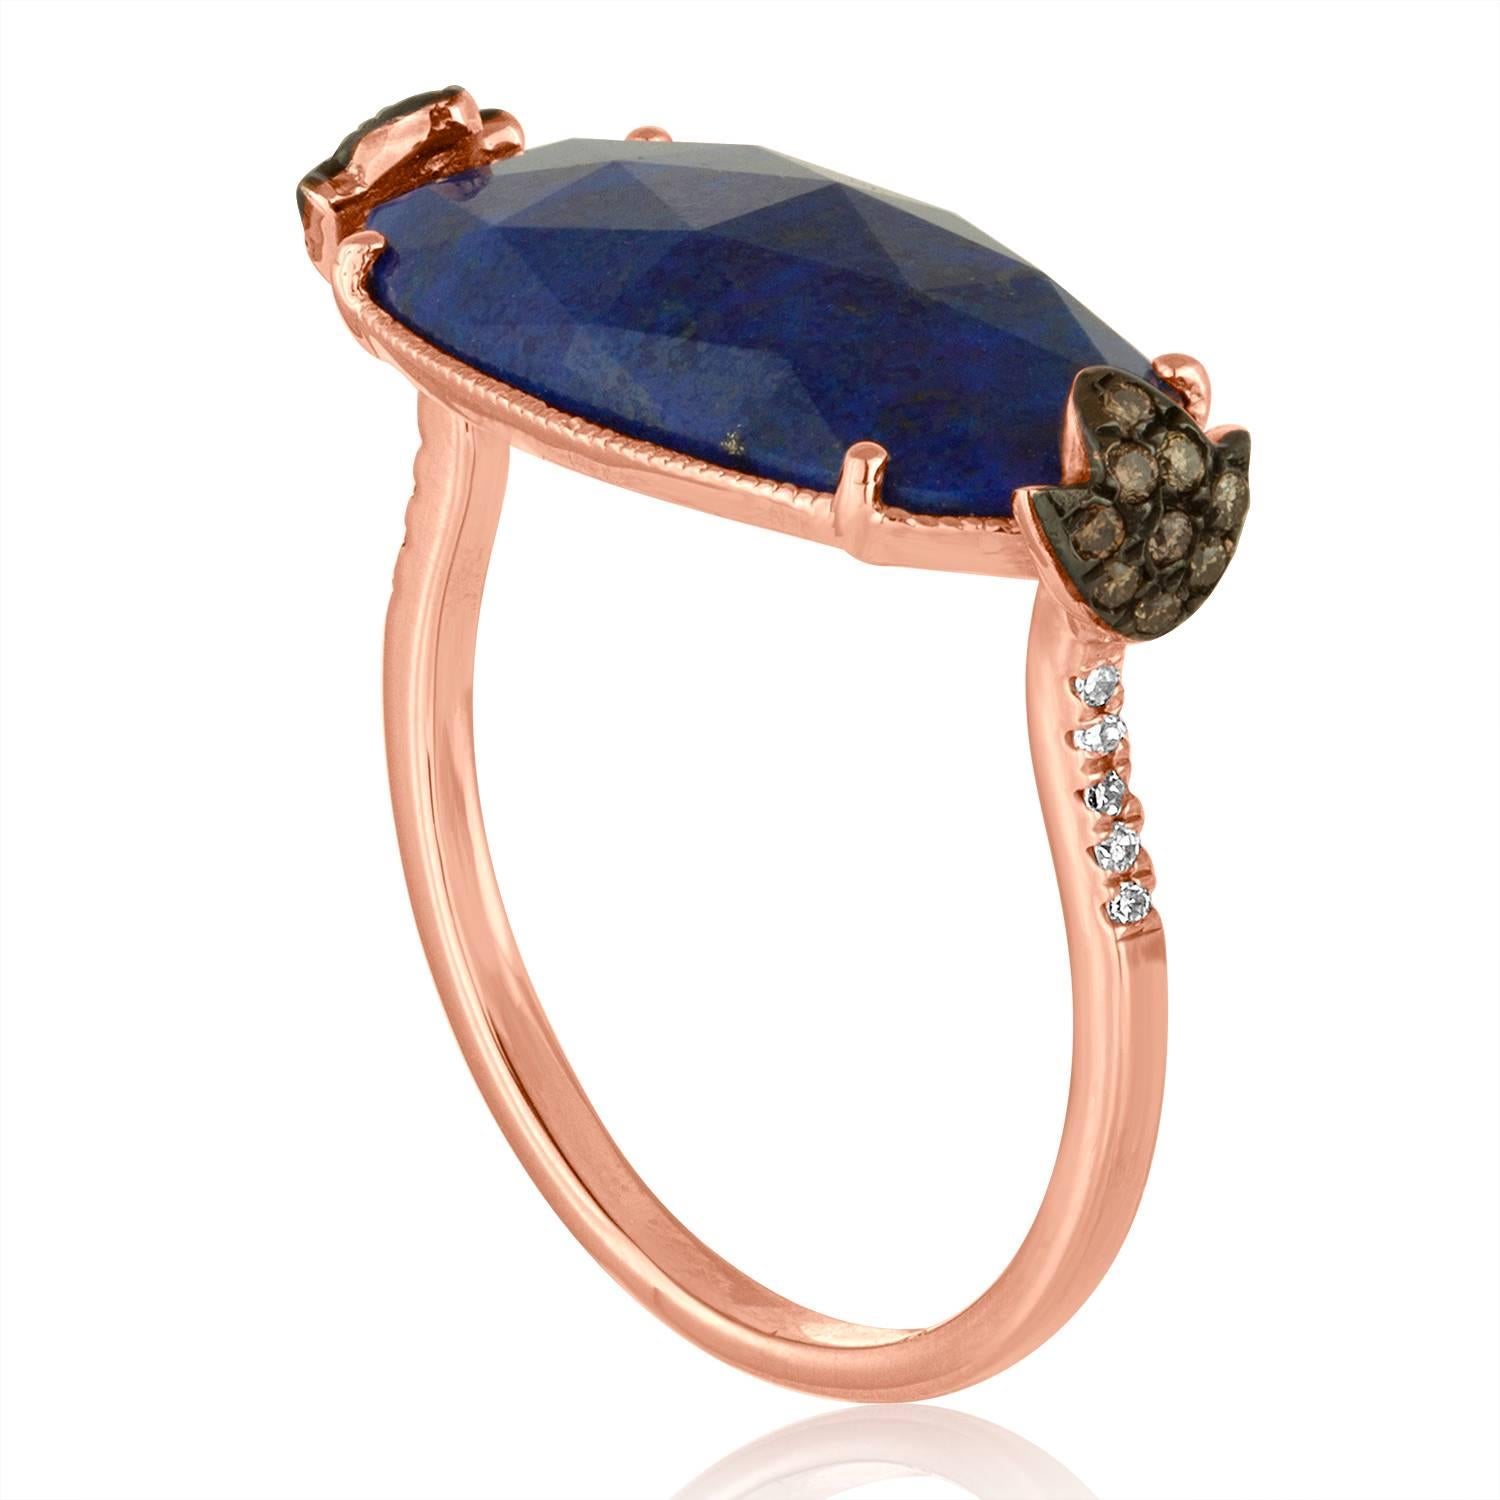 Beautiful and Fun Ring
The ring is 14K Rose Gold
There are 0.03 Carats In White Diamonds J/K SI
There are 0.09 Carats In Brown / Champagne Diamonds SI
The Center Stone is a Faceted Cabochon Lapis Lazuli 4.32 Carats
The ring measures on top 14/16